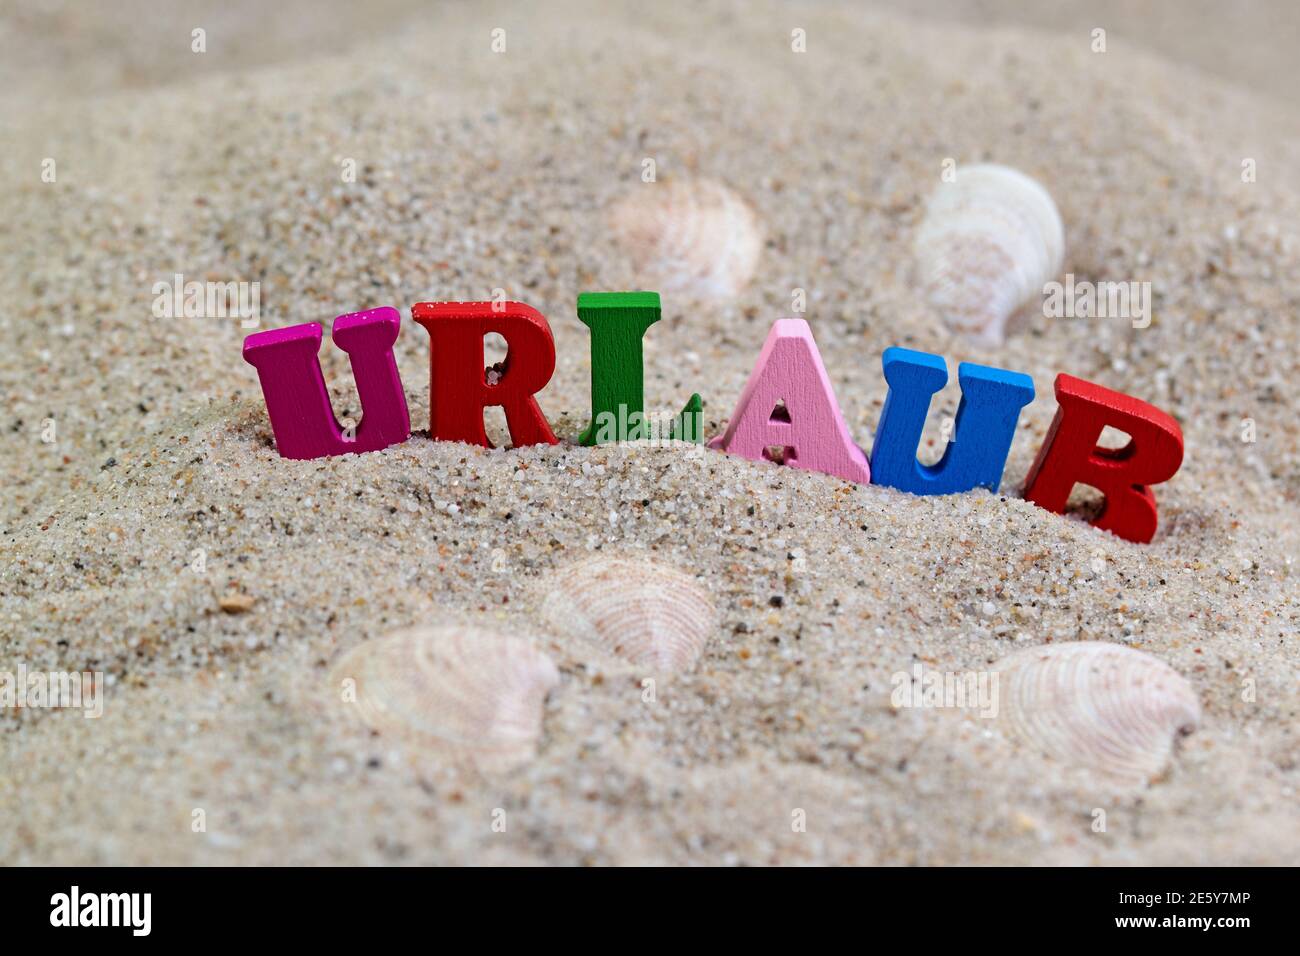 Colorful wooden letters in the sand with the text 'Urlaub', translation 'Vacation' Stock Photo